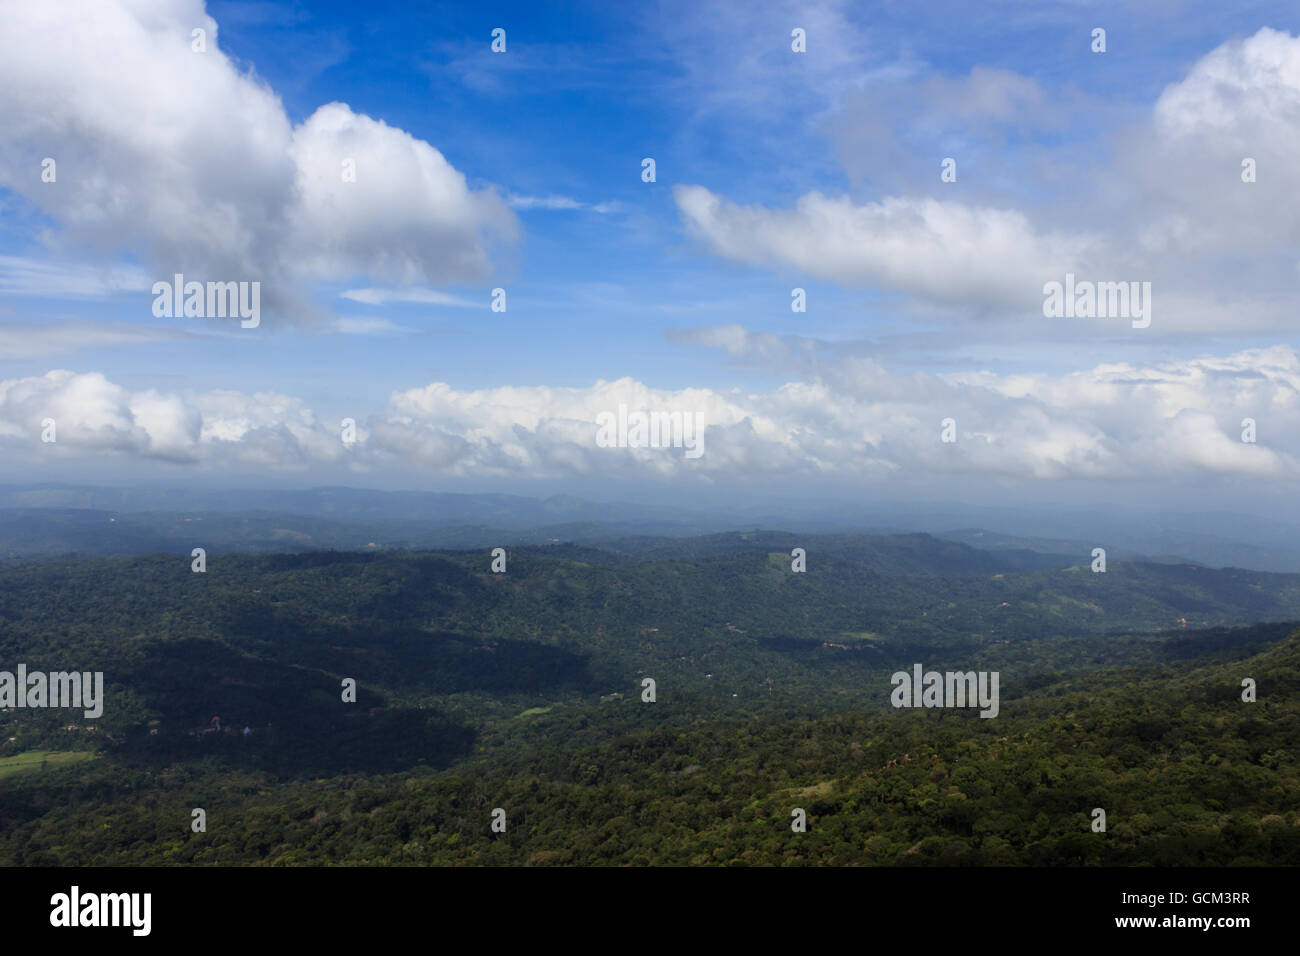 White Clouds Floating Above Hilly Terrain Stock Photo